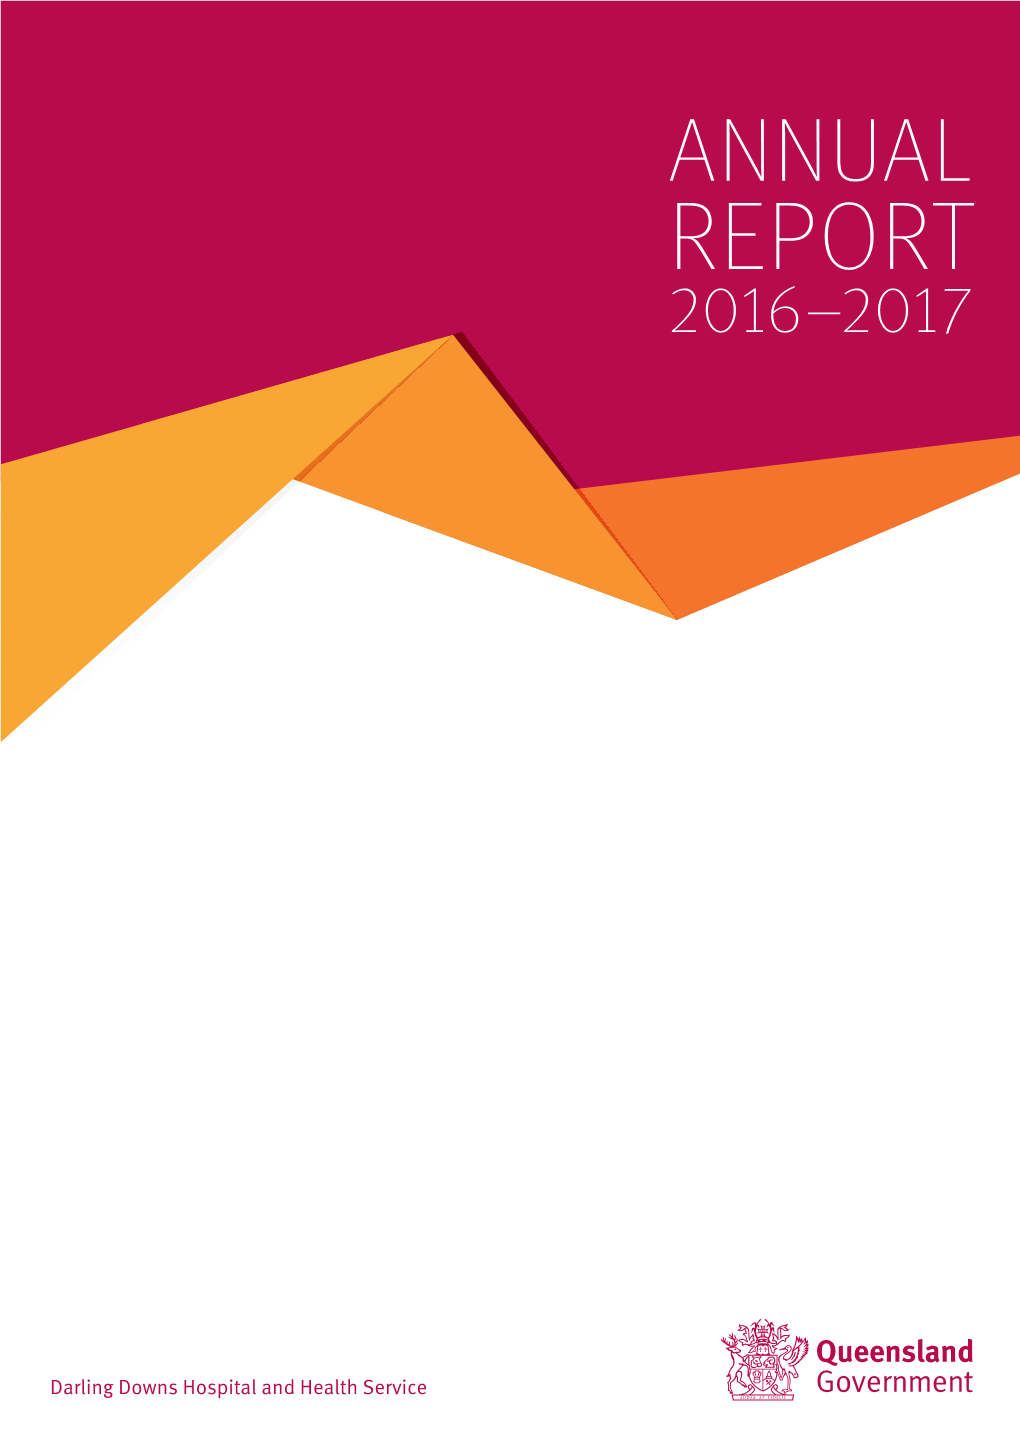 Darling Downs Hospital and Health Service Darling Downs Hospital and Health Service Annual Report 2016-17